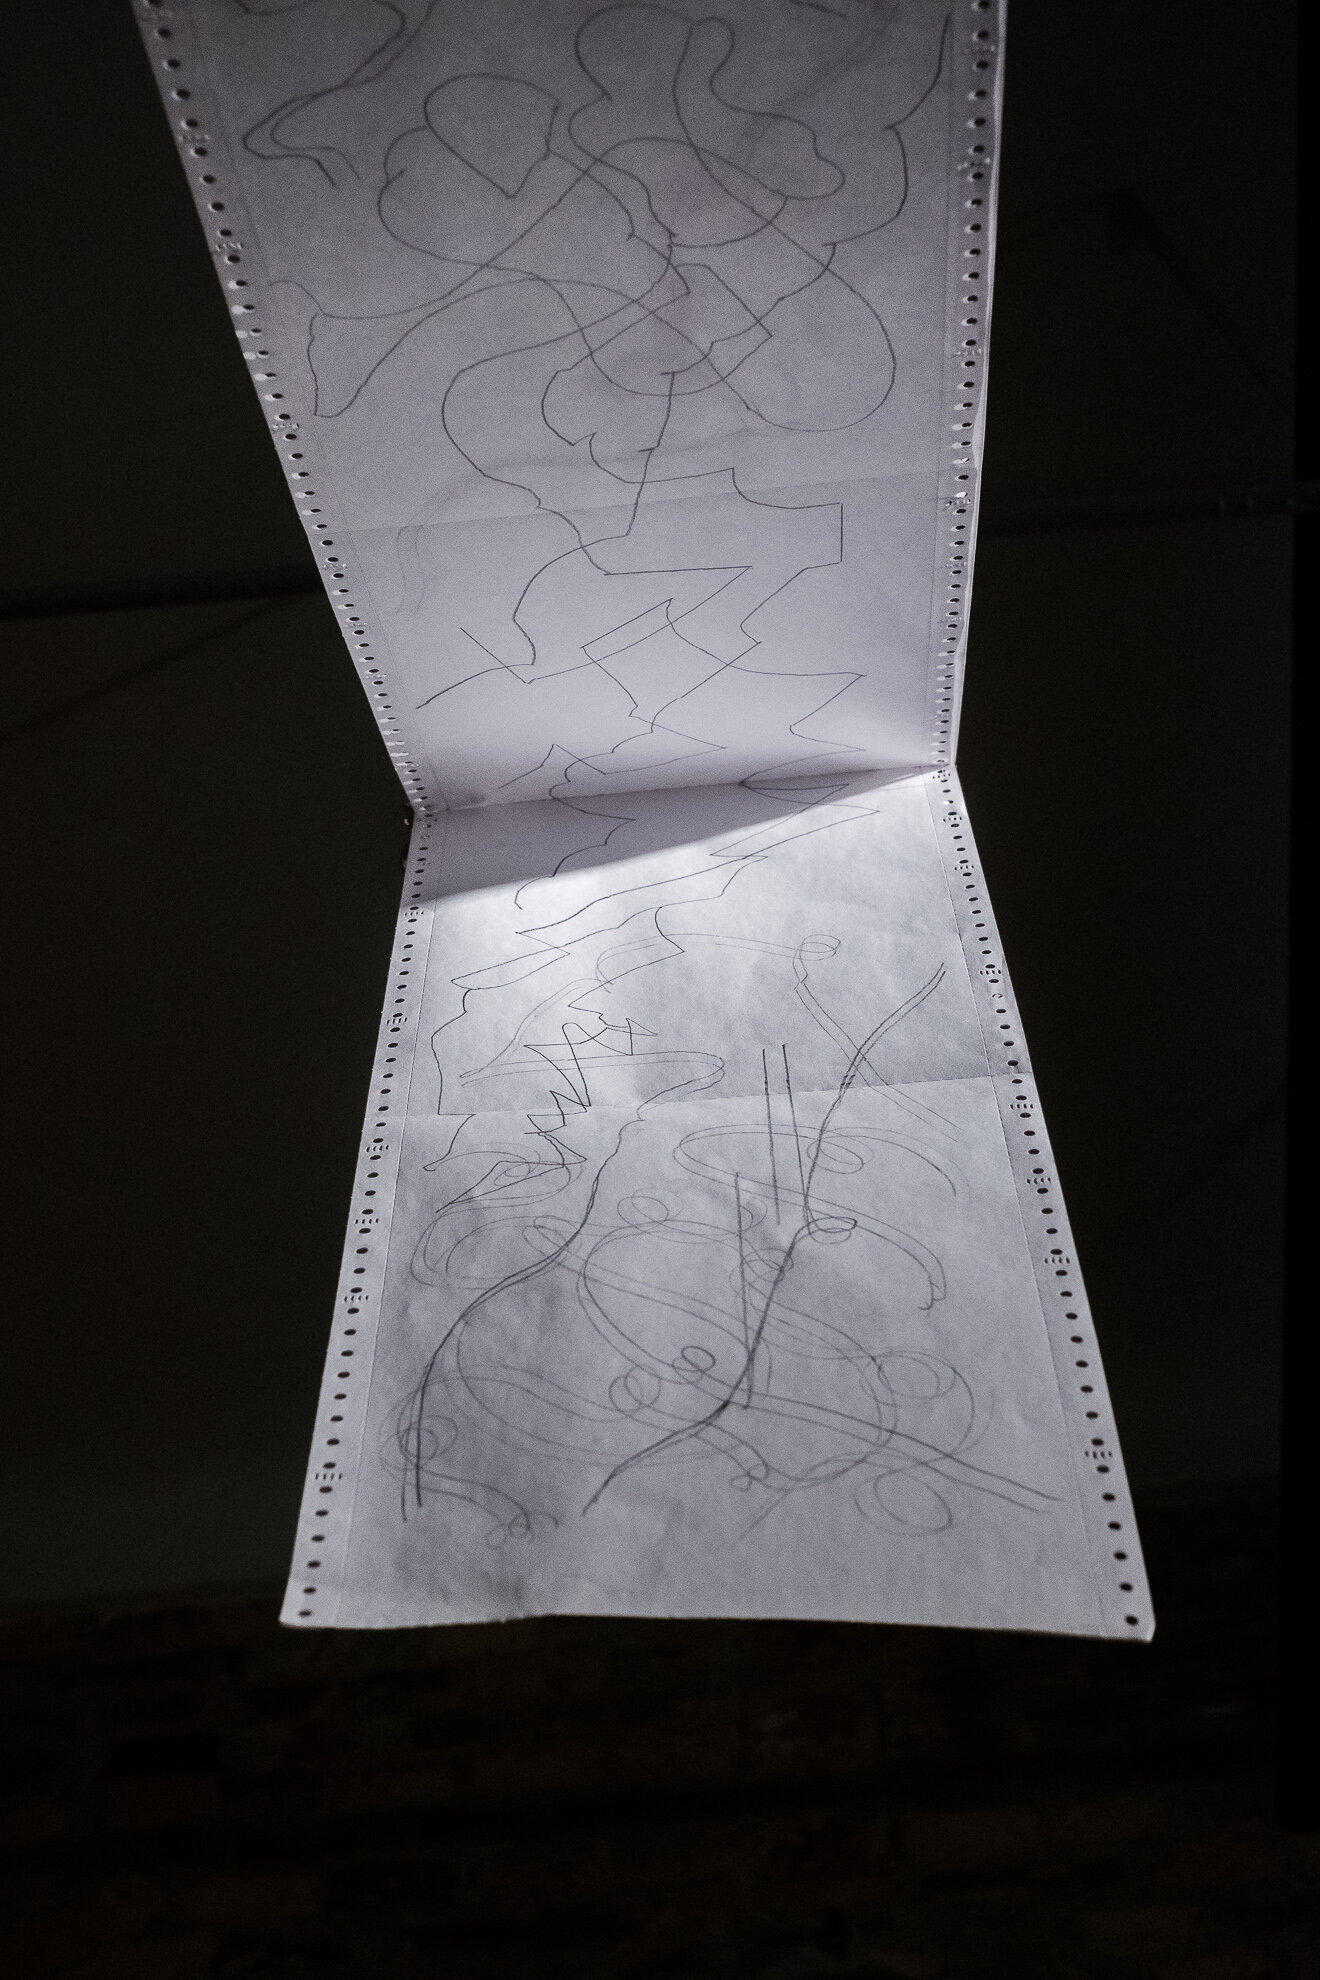  Thousand Years, 2019, Paper, graphite, dimensions variable. 